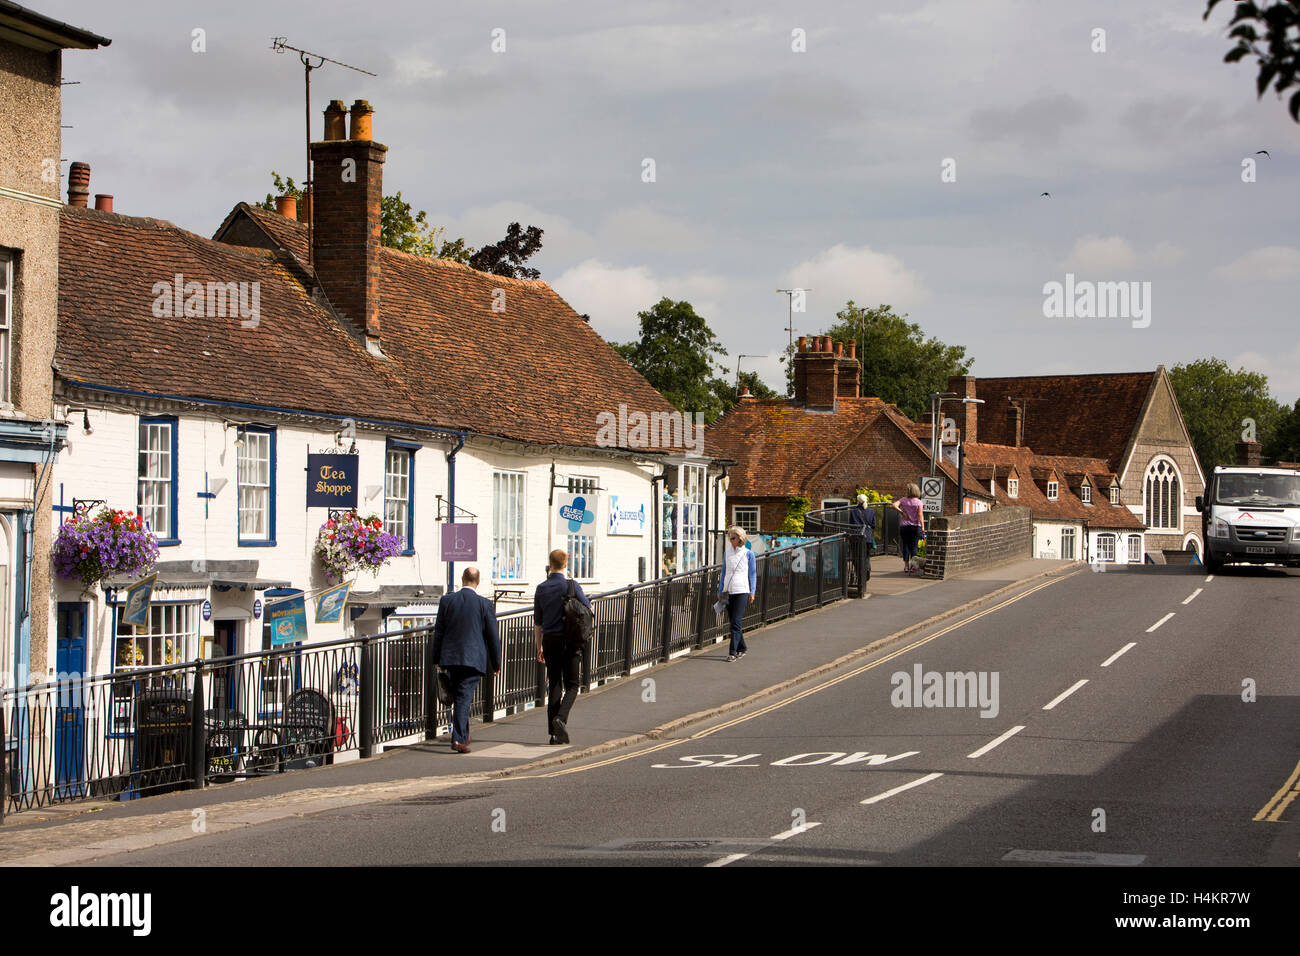 England, Berkshire, Hungerford, High Street, Tutti Pole café and shops beside Kennet and Avon Canal Stock Photo